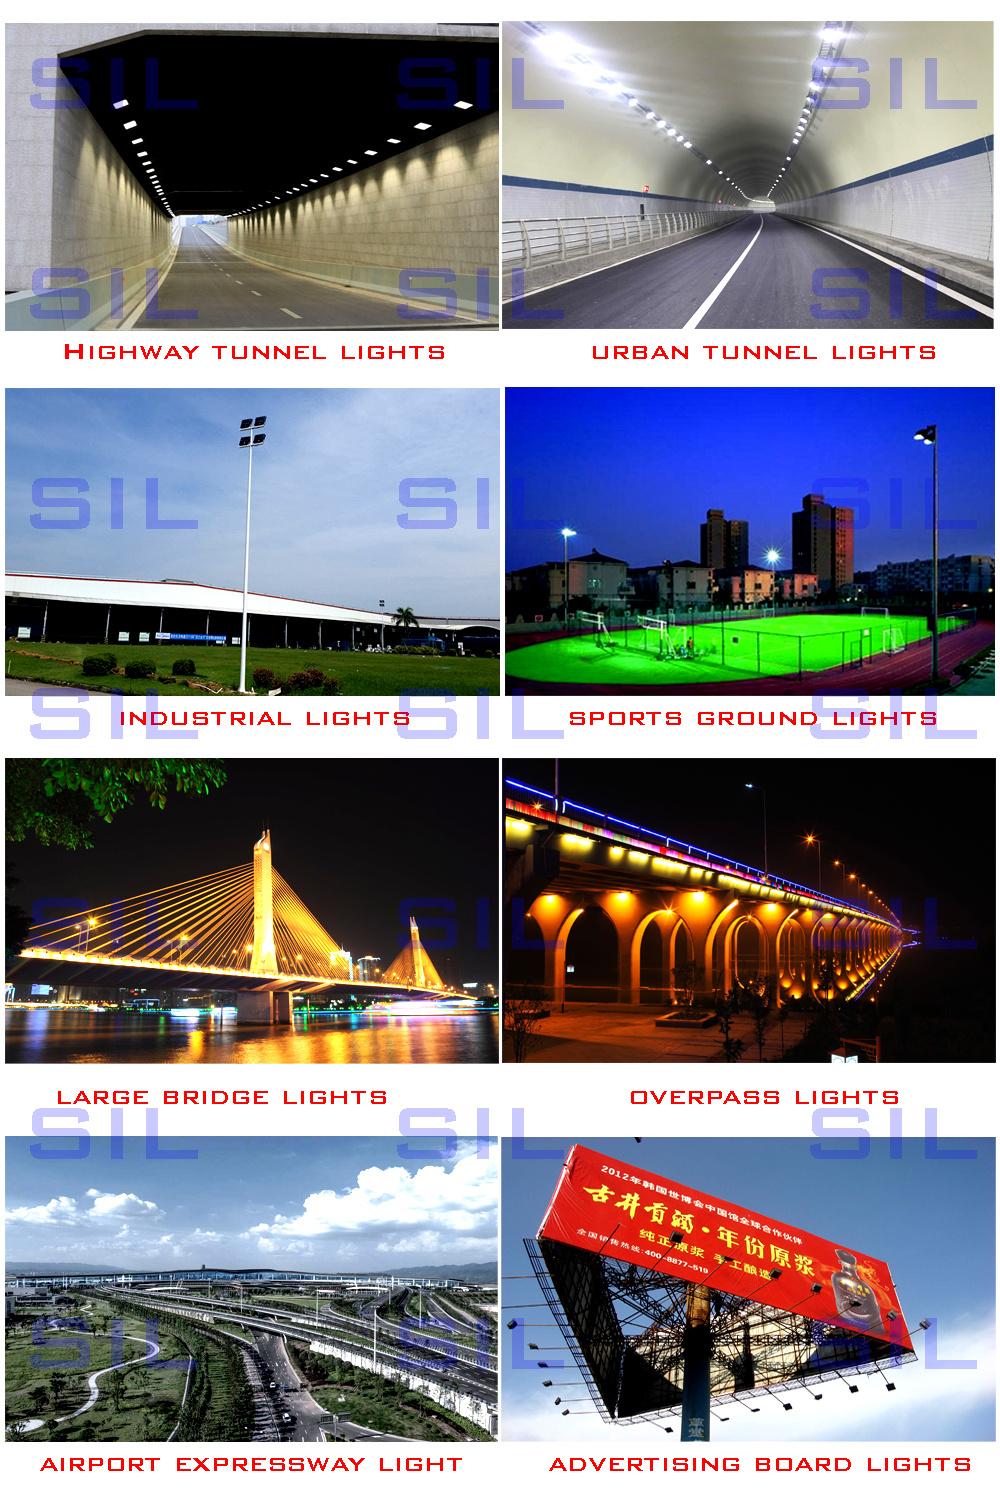 Wholesale Customized Good Quality Landscape Outdoor Flood Lights IP65 50W Outdoor Lighting Floodlights